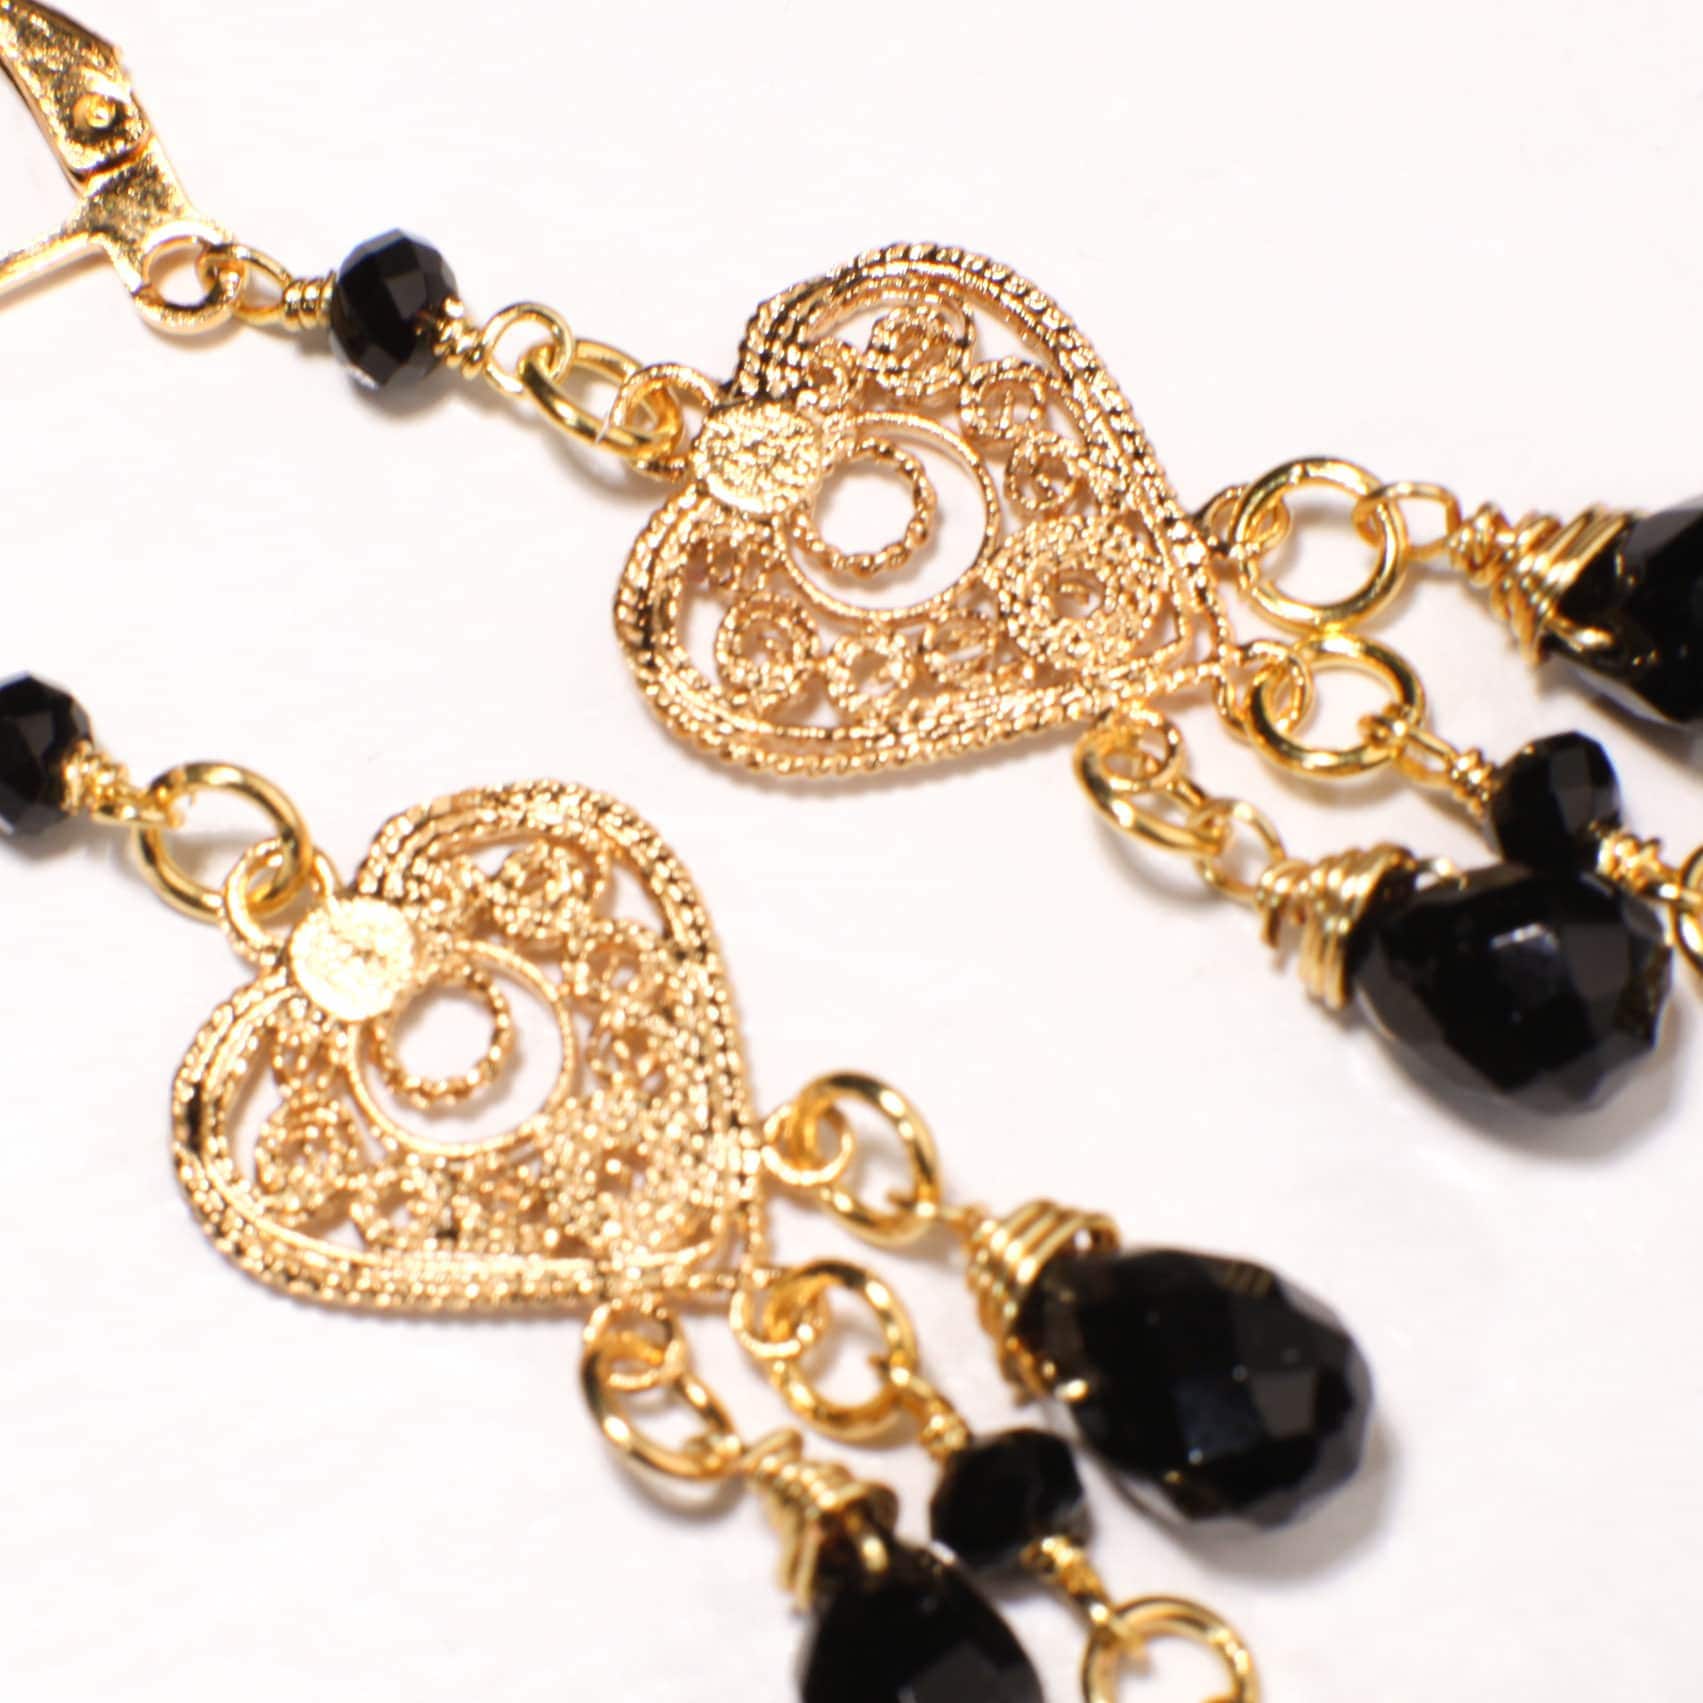 Natural Black Onyx Dangling Filigree Chandelier Heart, Faceted Onyx Spacers Wire Wrapped Gold Earrings, Handmade Gift for Her